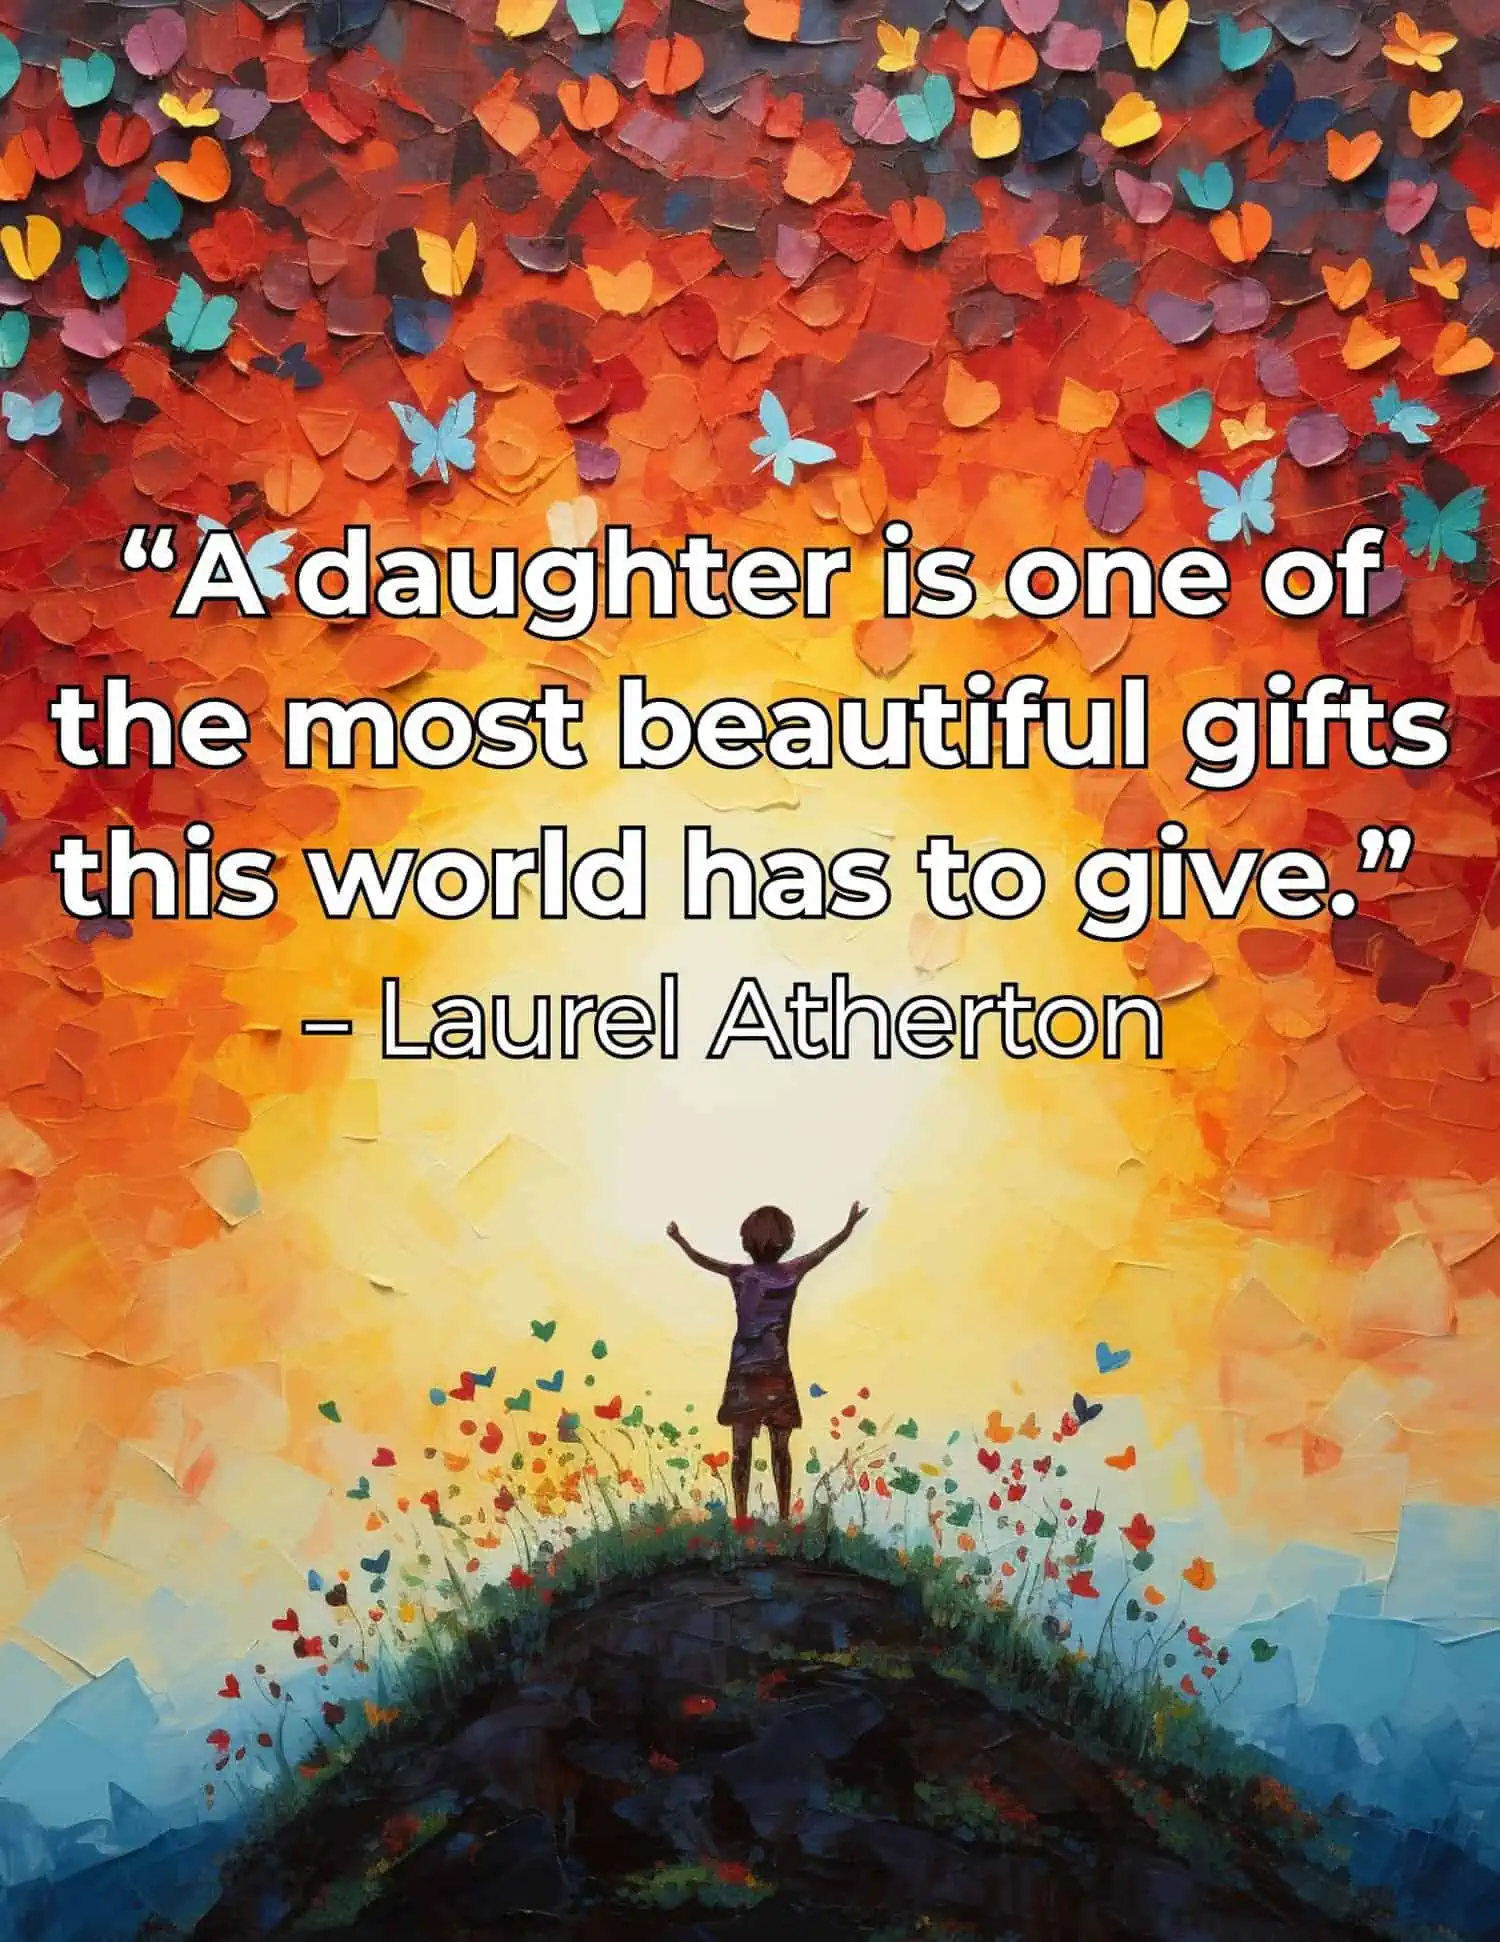 Thoughtful and meaningful quotes to celebrate a daughter's special day.